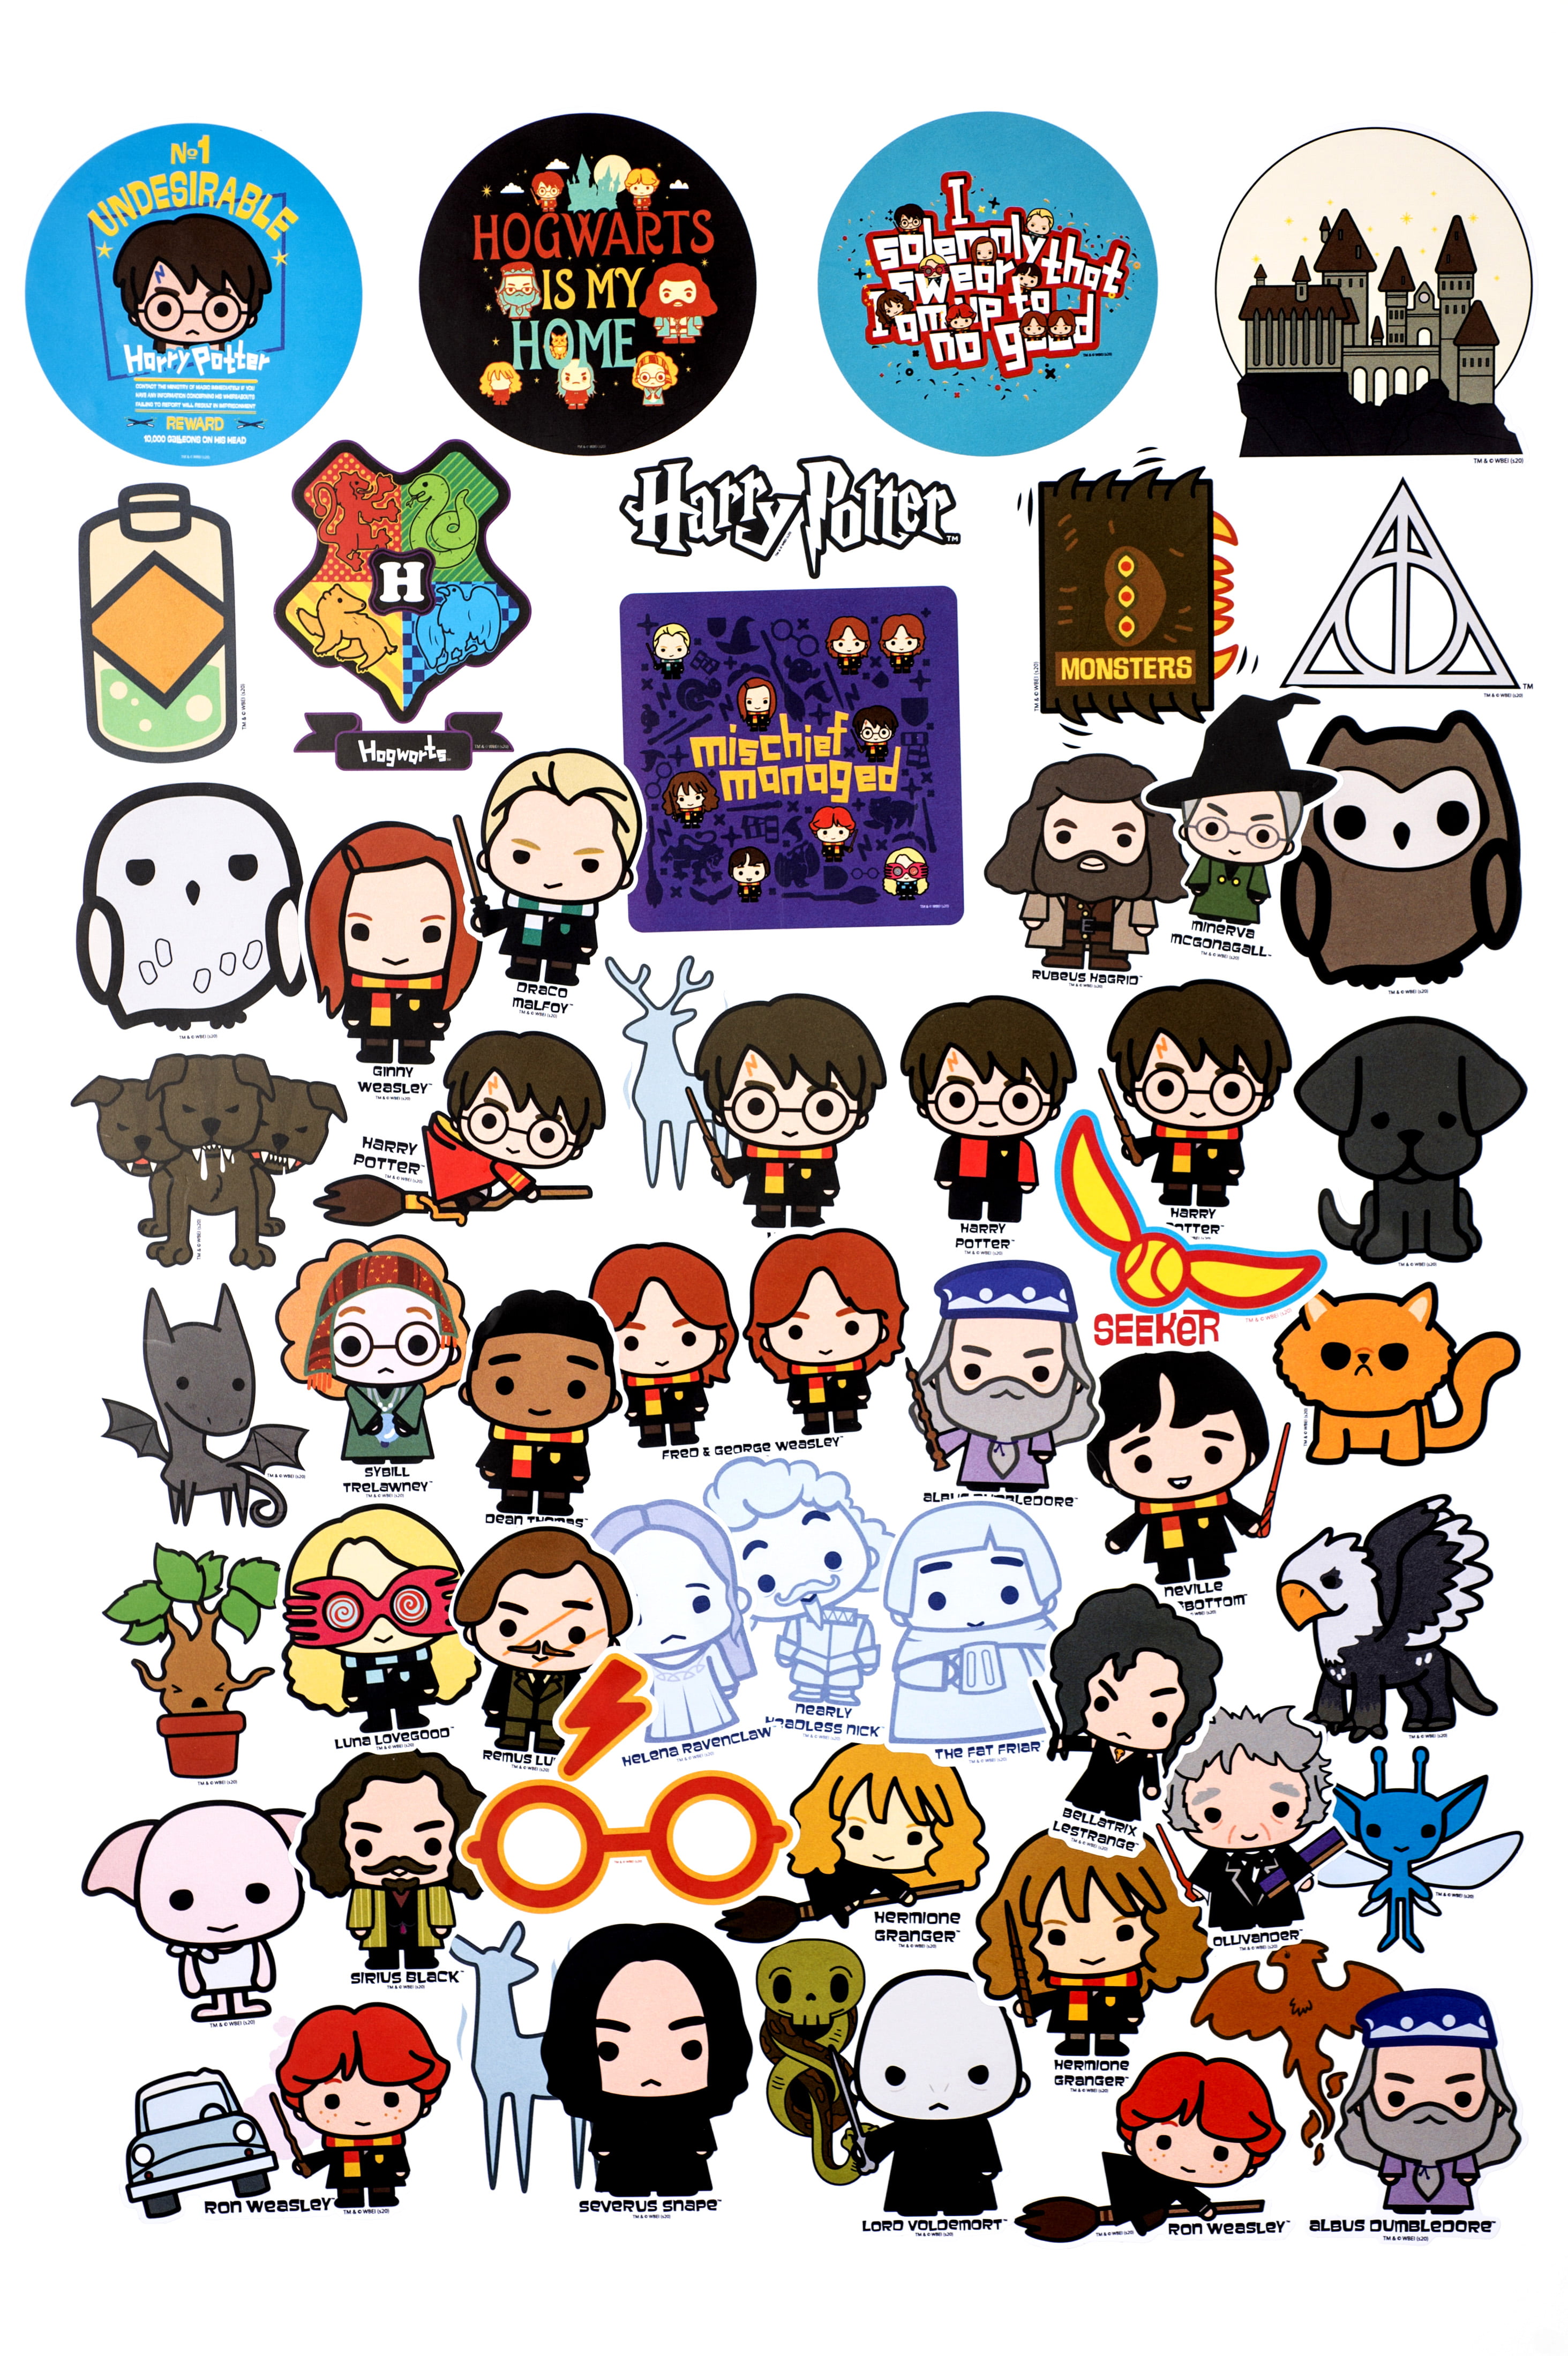 Conquest Journals Harry Potter Chibi Vinyl Stickers, Set of 60 Unique Stickers Including 5 Holograms, Waterproof and UV Resistant, Great for All